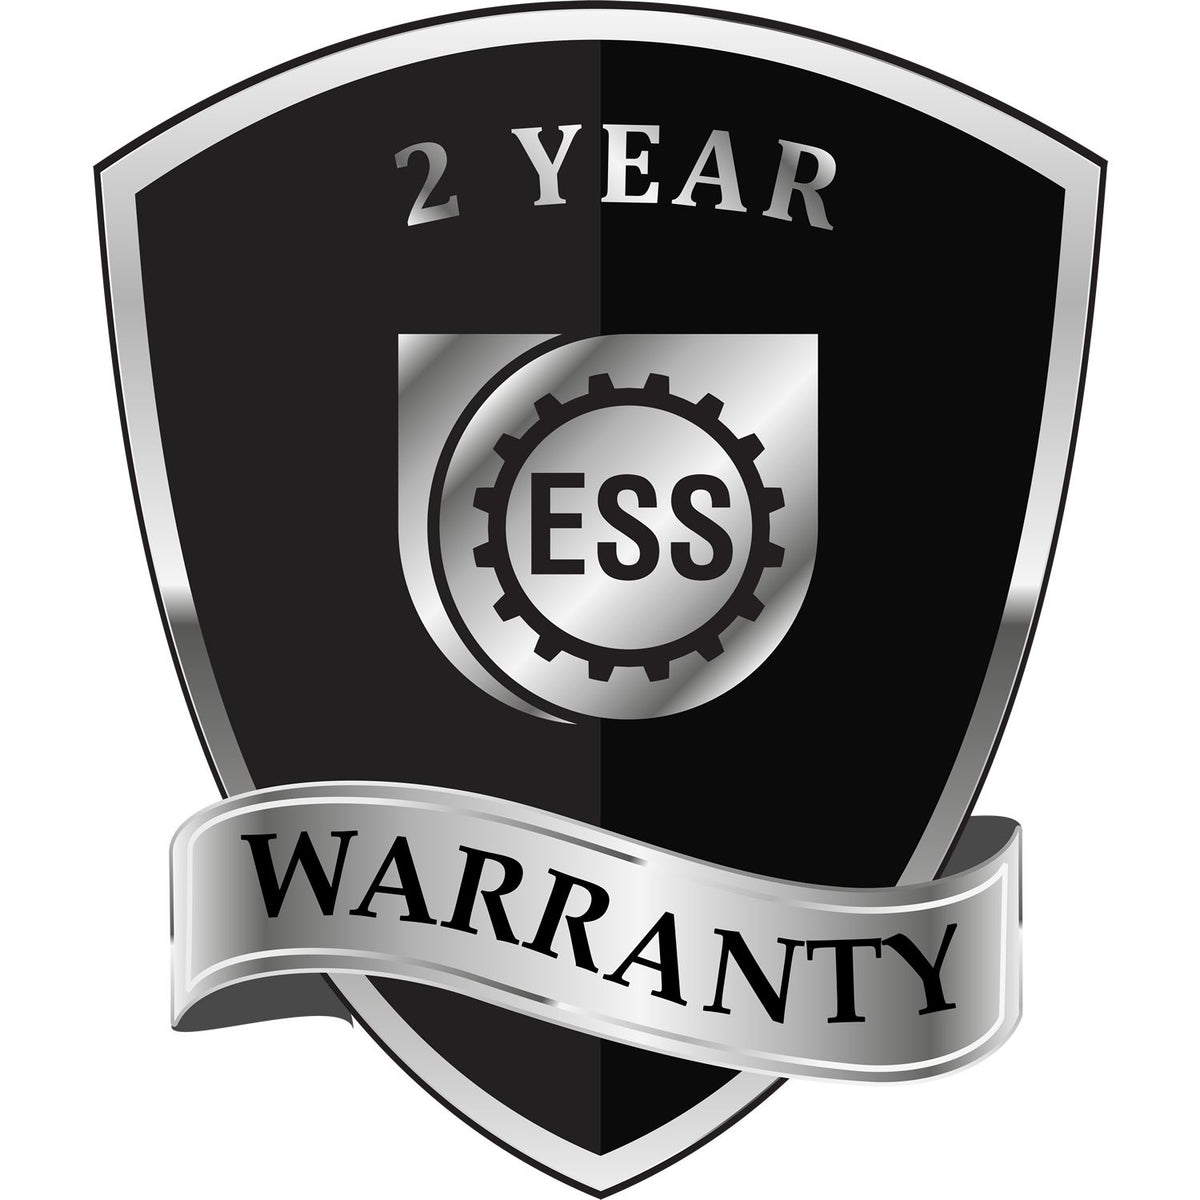 A badge or emblem showing a warranty icon for the Connecticut Engineer Desk Seal